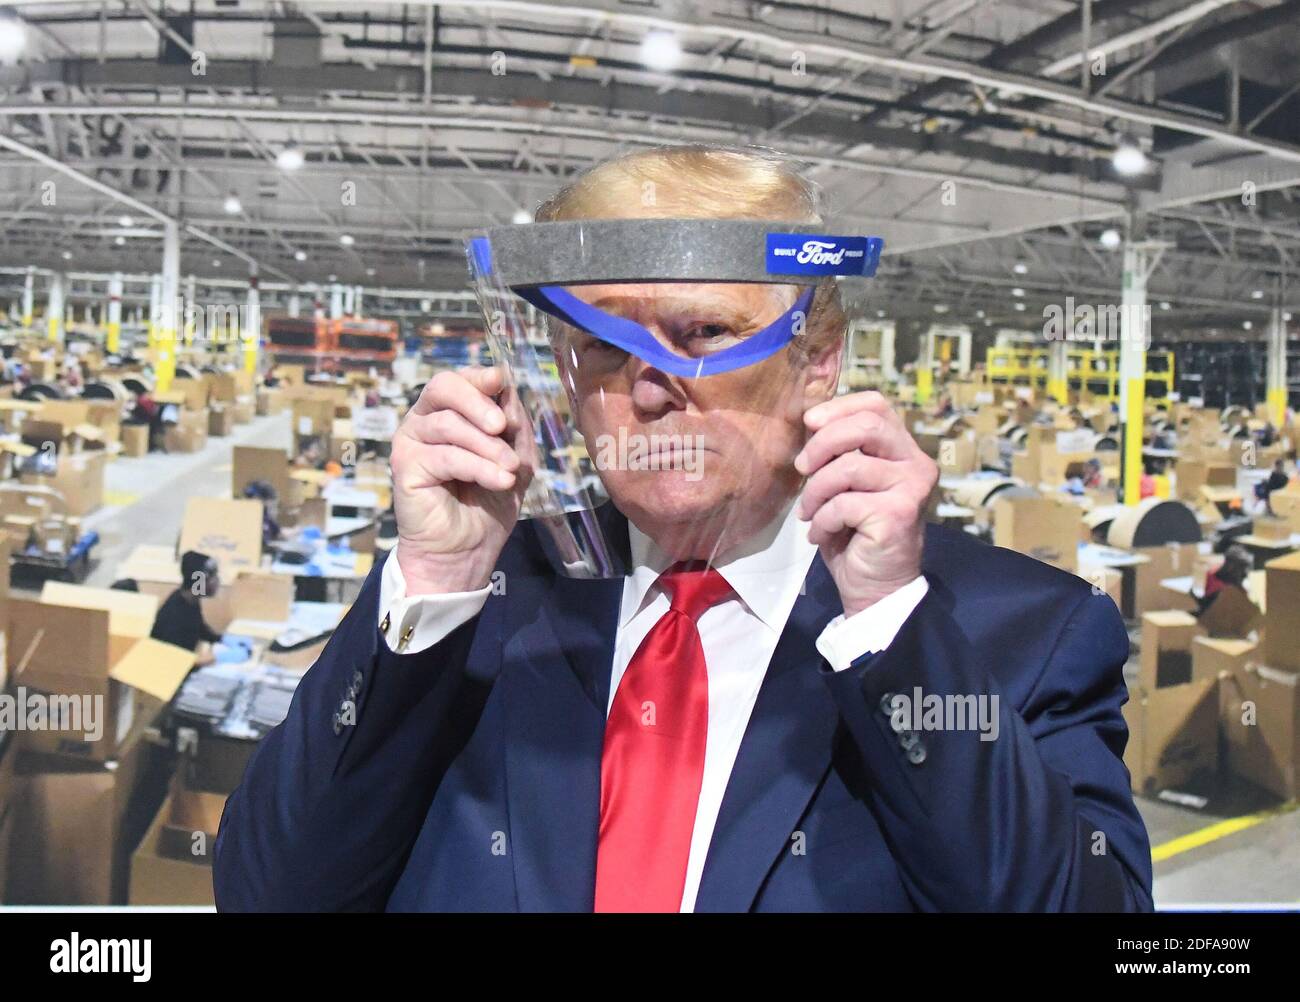 NO FILM, NO VIDEO, NO TV, NO DOCUMENTARY - President Trump looks through a face shield, in front of poster of the manufacturing of these shields, while touring Ford Motor Co.'s Rawsonville Components Plant in Ypsilanti, MI, USA on Thursday, May 21, 2020. Trump says he wore a mask in a 'back area' during a factory tour in Michigan, but removed it before facing the cameras. He told reporters he took off the facial covering at the Ford car plant because he 'didn't want to give the press the pleasure of seeing it', and he was about to make a speech. Photo by Daniel Mears/The Detroit News/TNS/ABACA Stock Photo